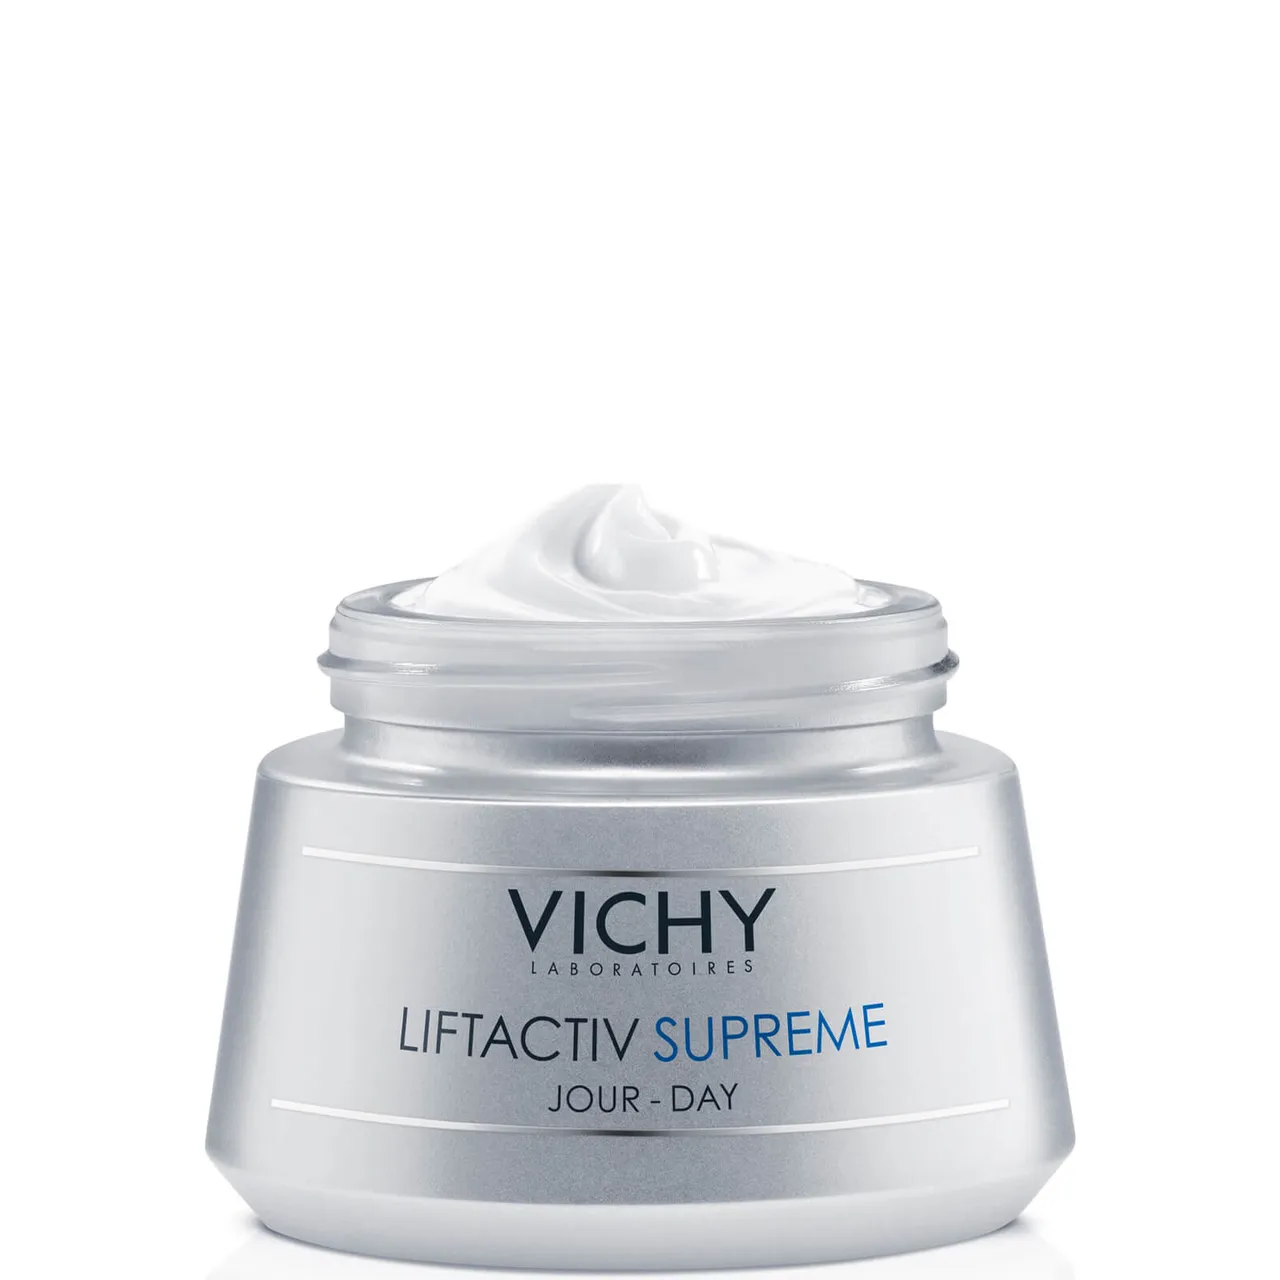 Vichy Liftactiv H.A. Anti-Wrinkle Firming Cream with Hyaluronic Acid 50ml